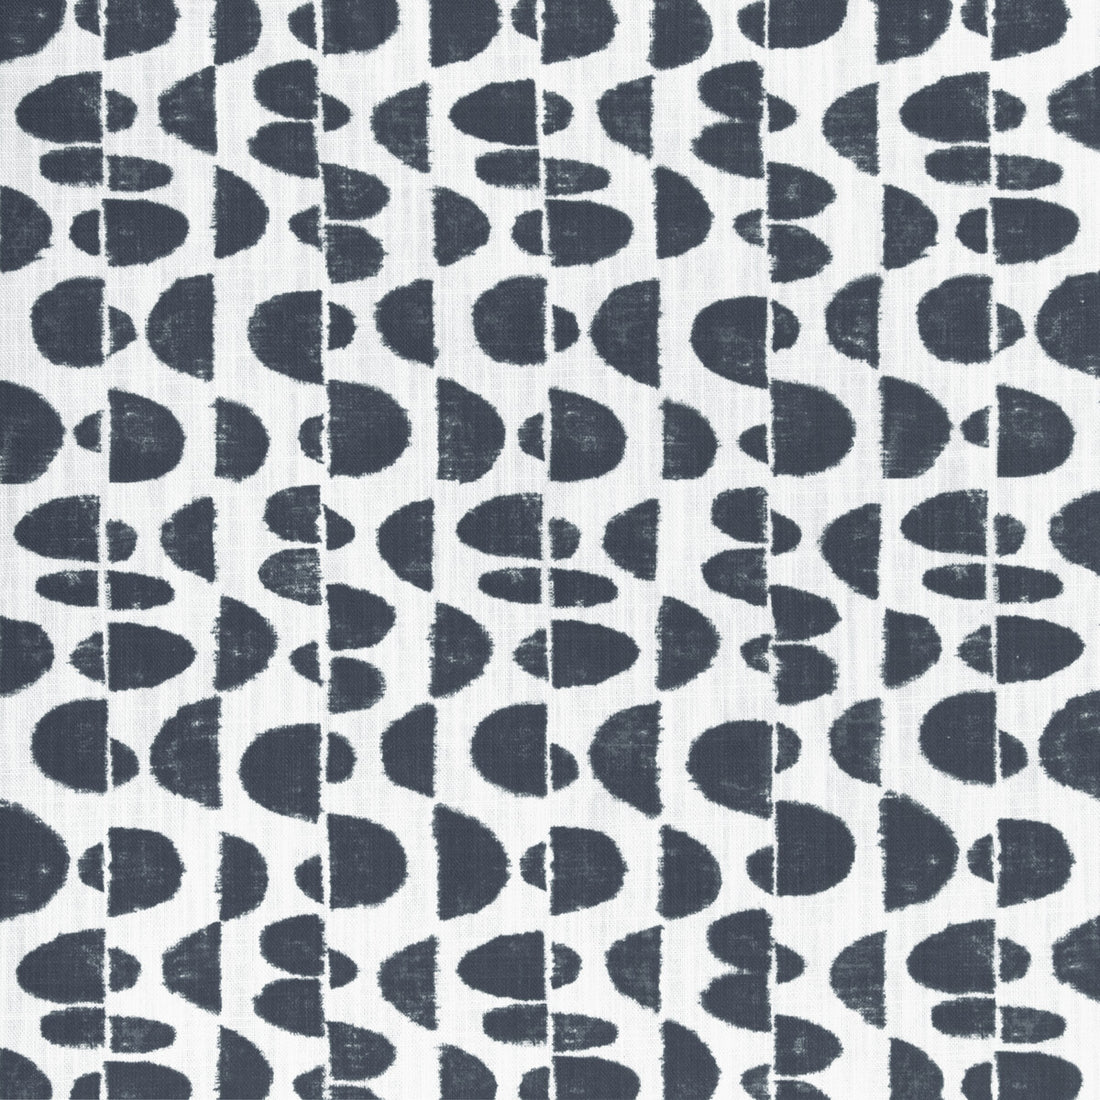 Moon Phase fabric in solar color - pattern MOON PHASE.81.0 - by Kravet Basics in the Small Scale Prints collection